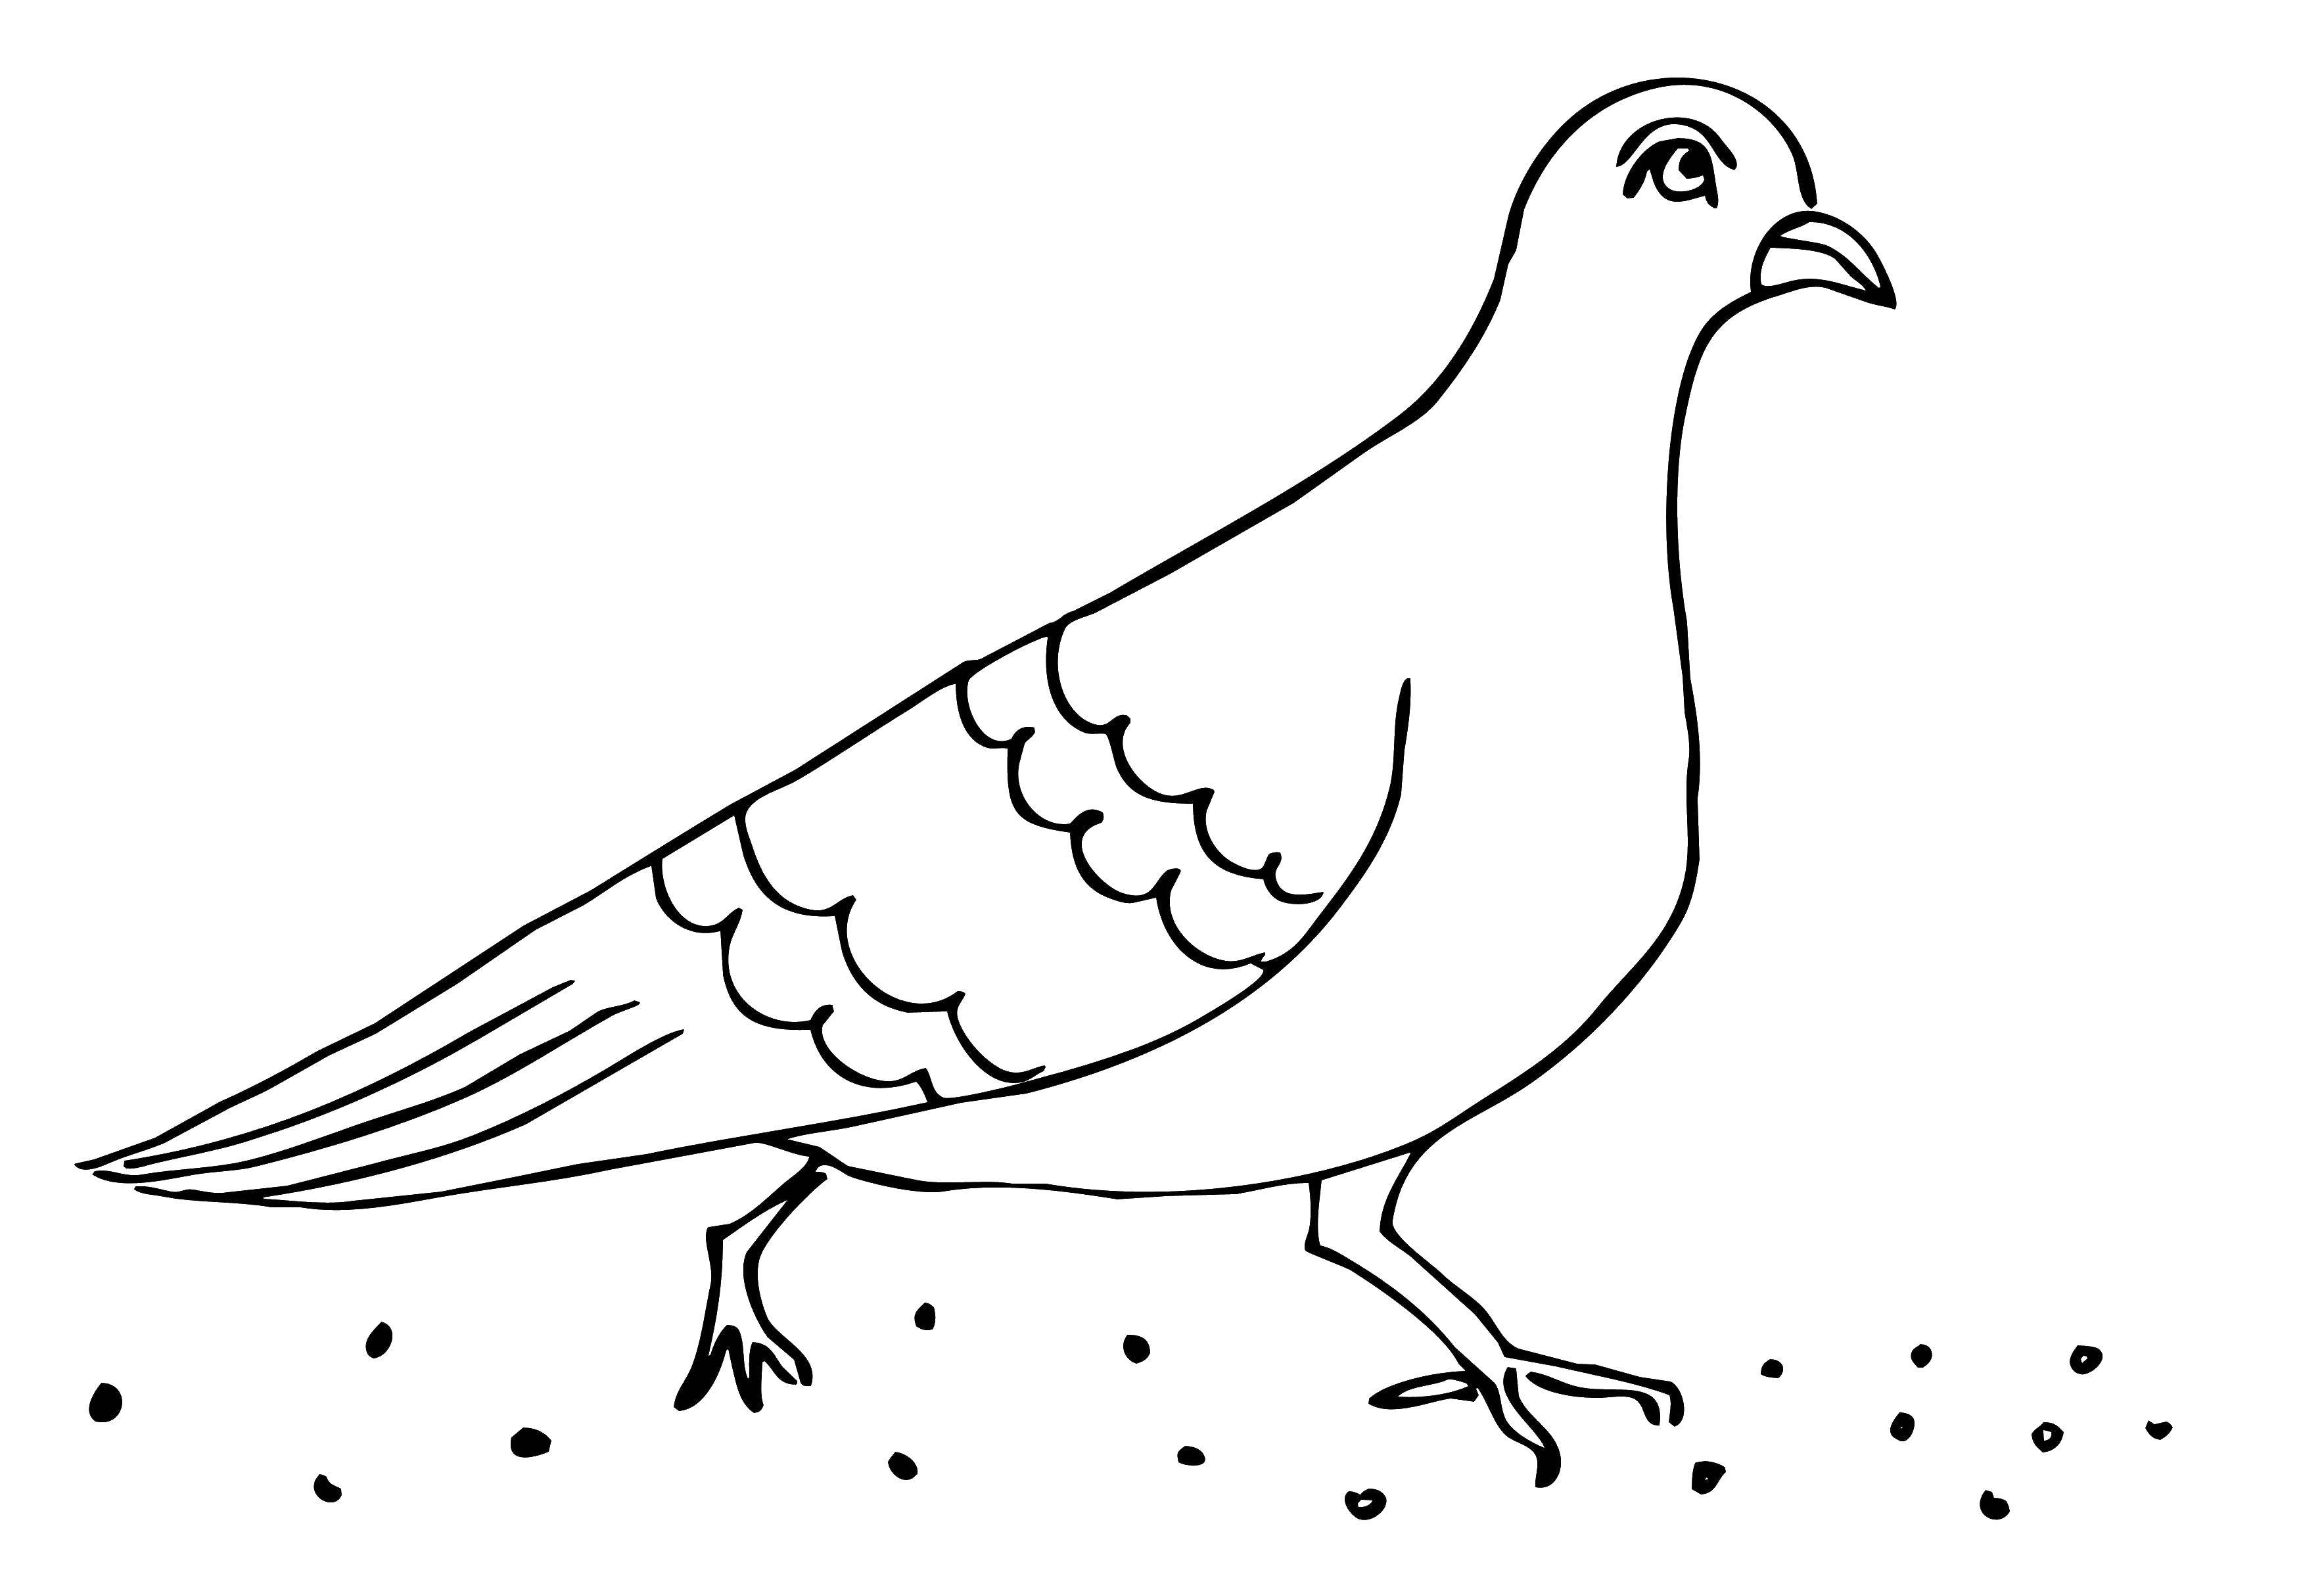 Coloring Dove and millet. Category birds. Tags:  birds, doves, millet.